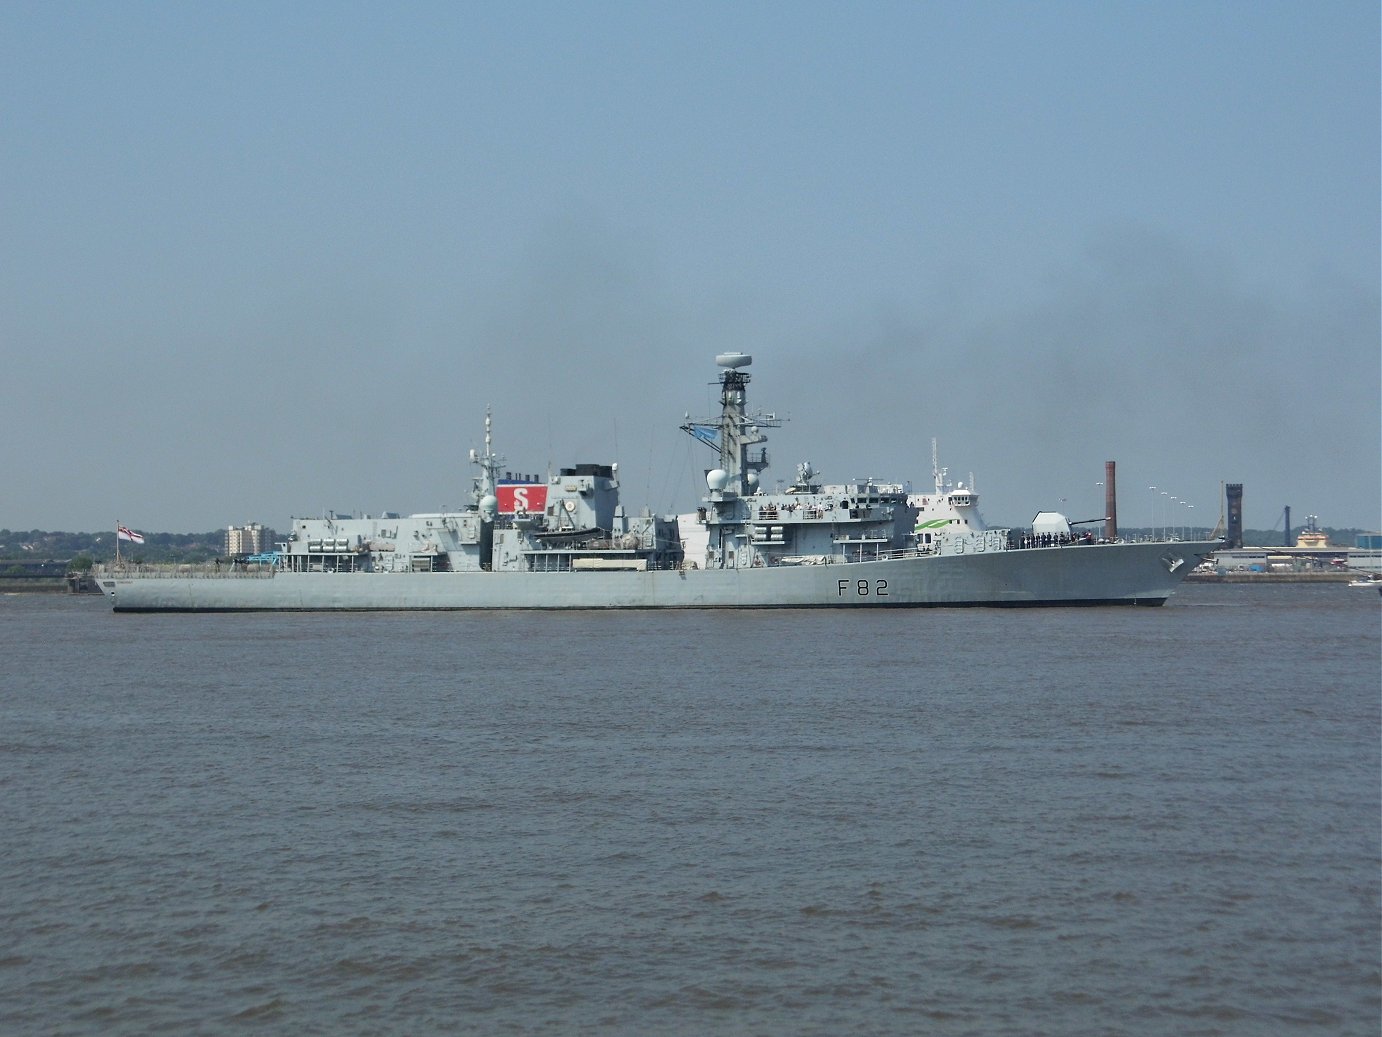 Type 23 frigate H.M.S. Somerset at Liverpool, May 28th 2018